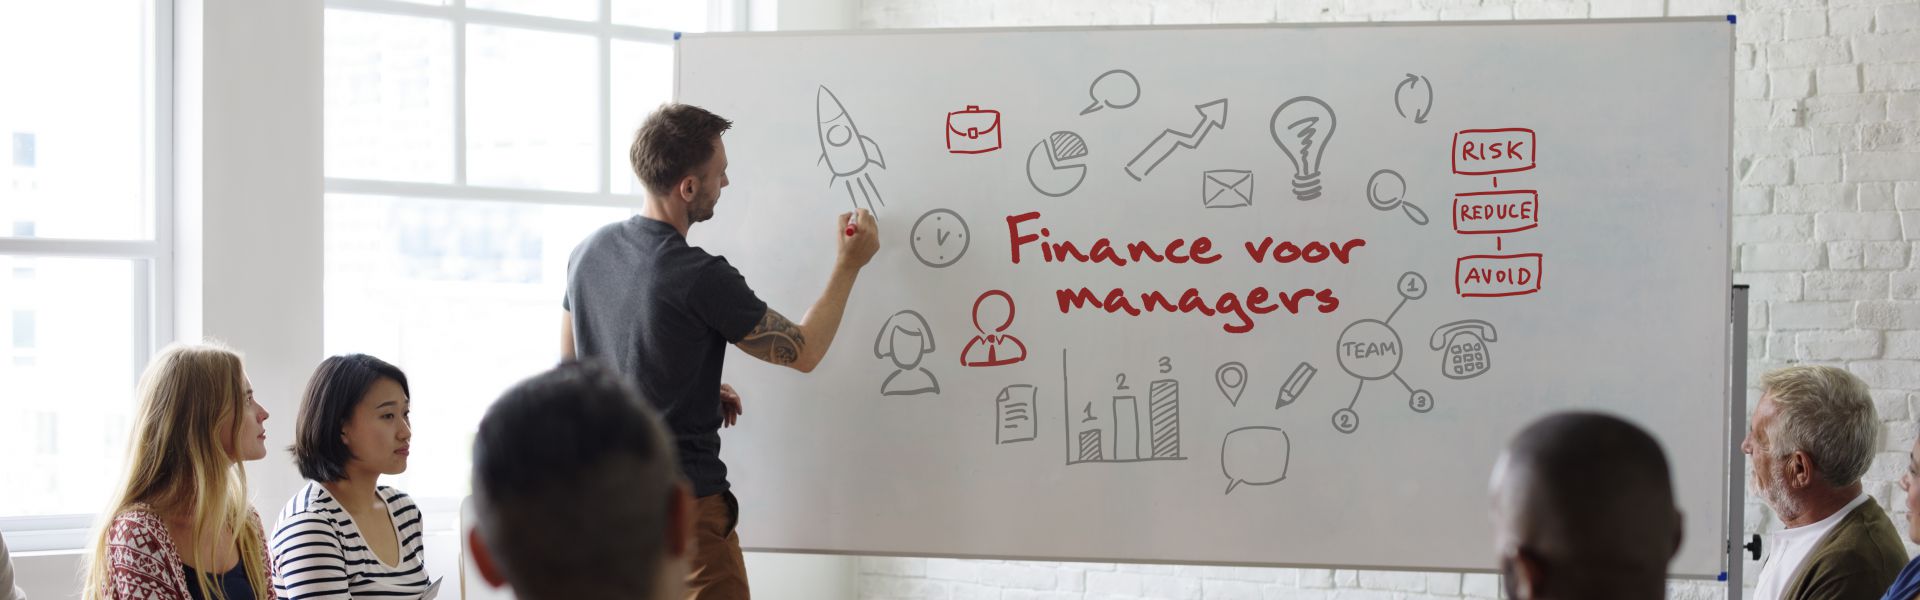 Finance voor managers (MBA)